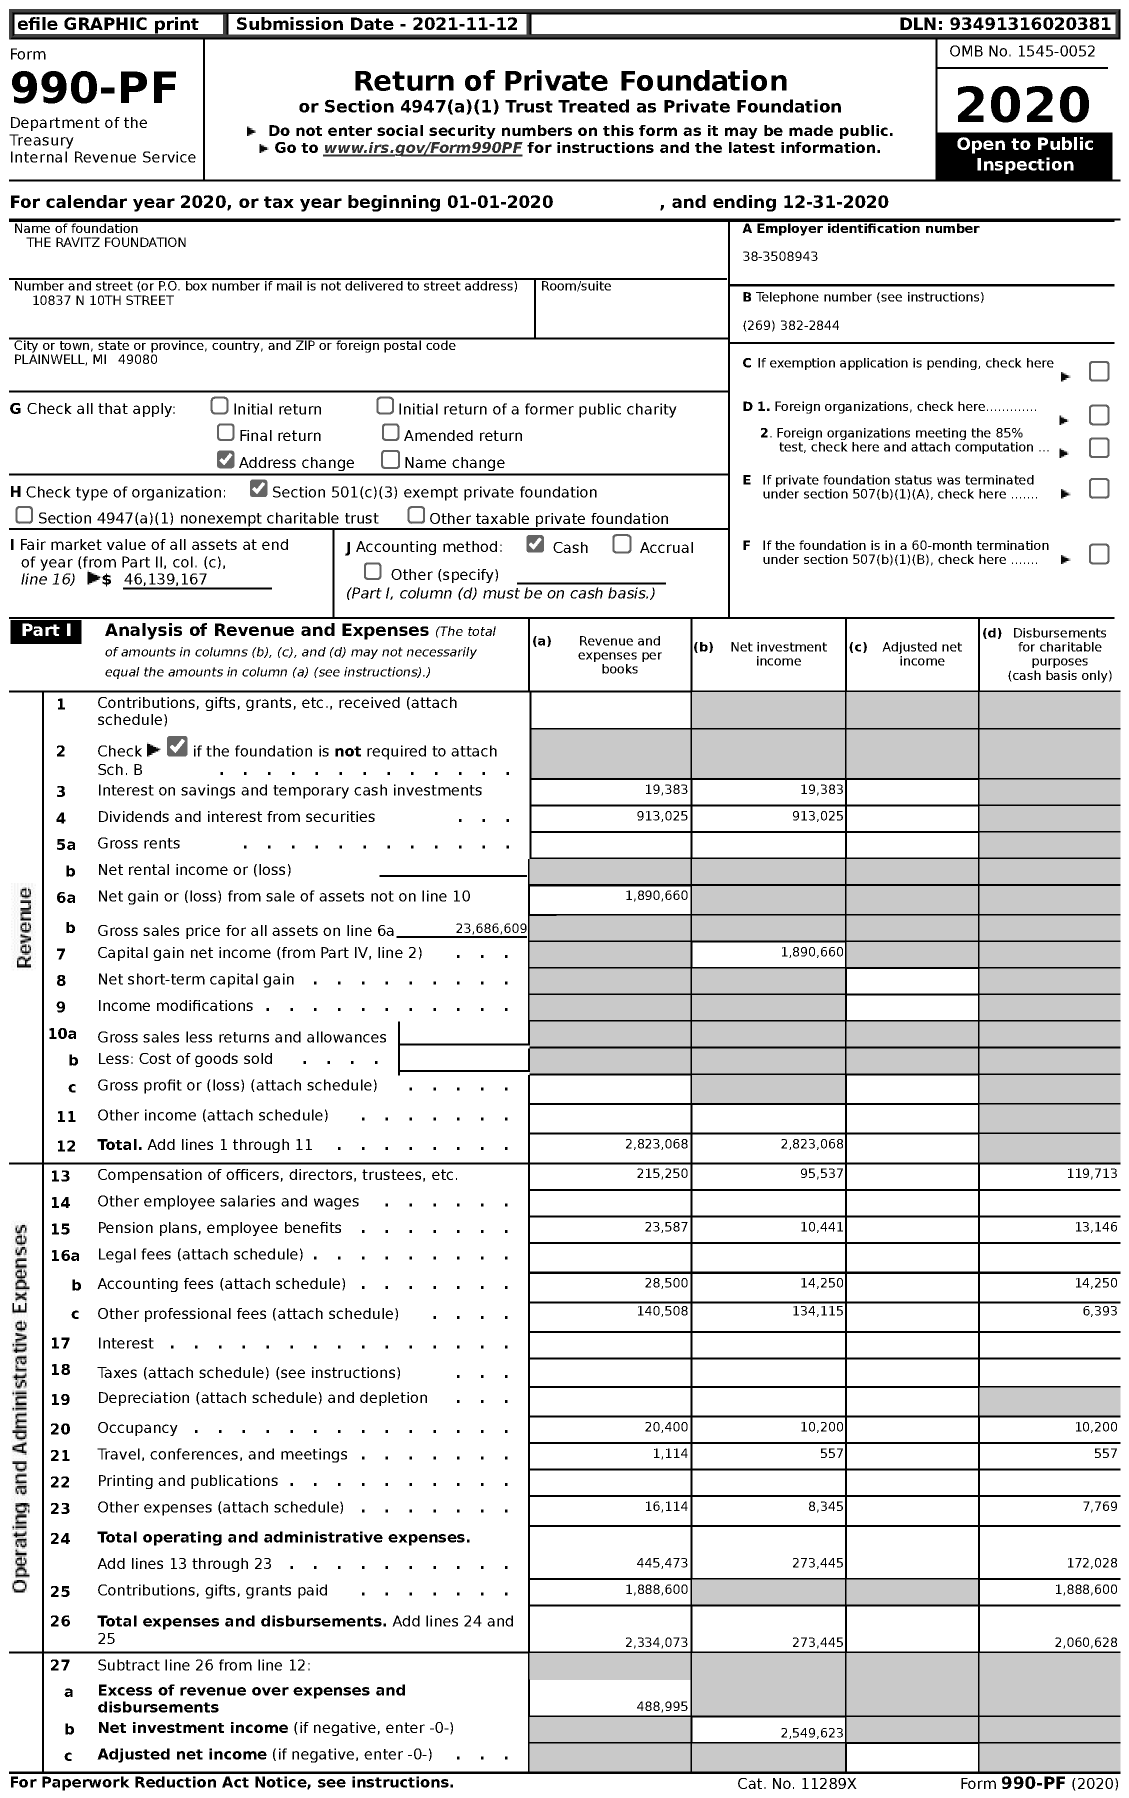 Image of first page of 2020 Form 990PF for The Ravitz Foundation